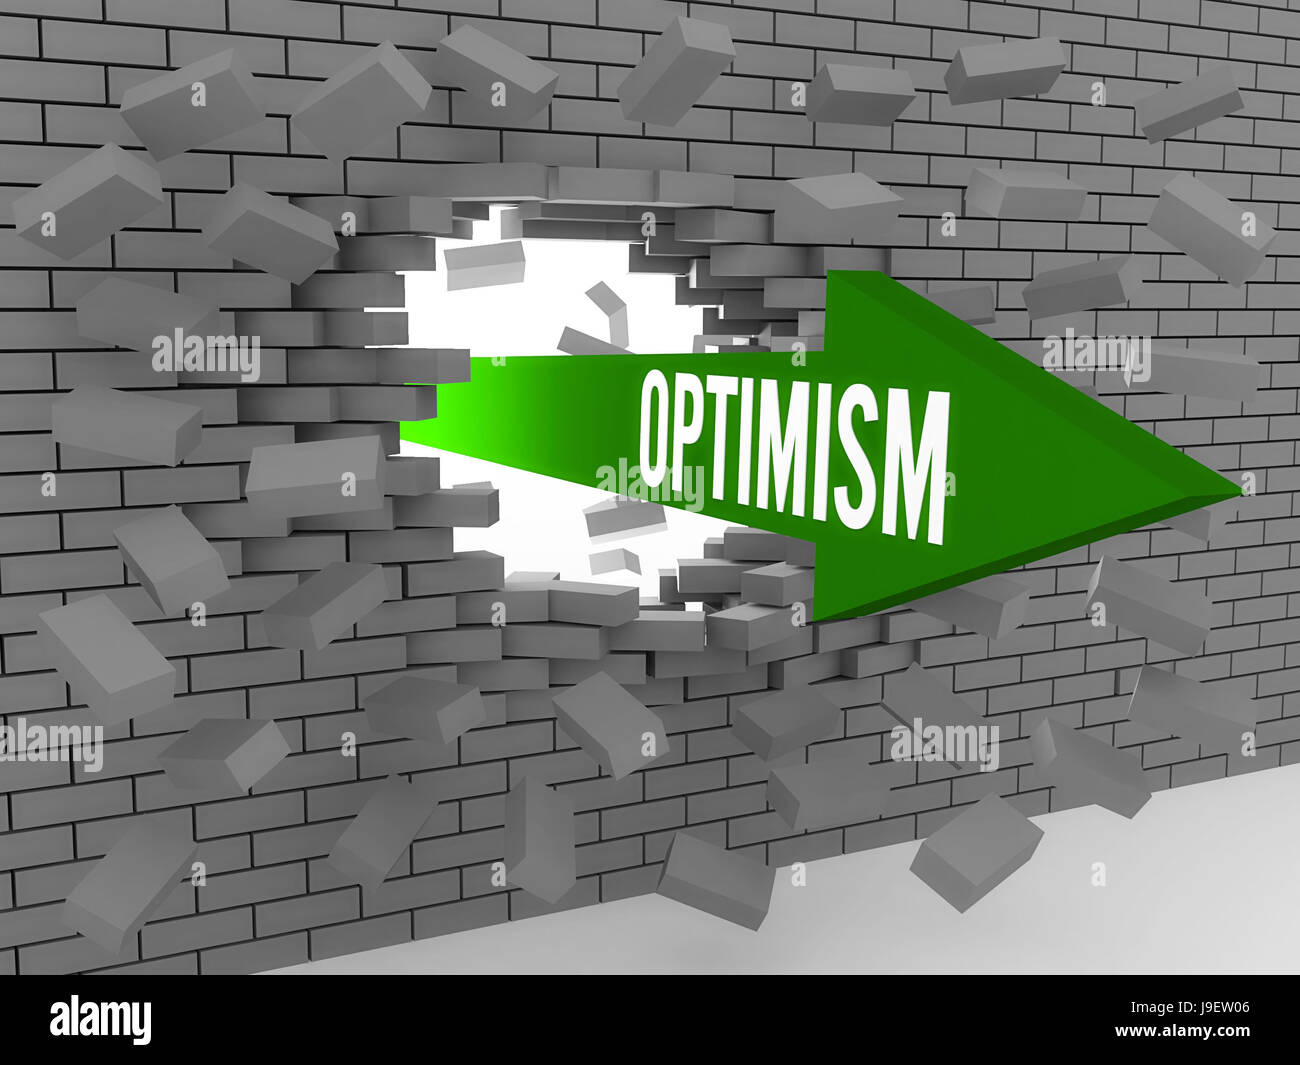 Arrow with word Optimism breaking brick wall. Concept 3D illustration. Stock Photo